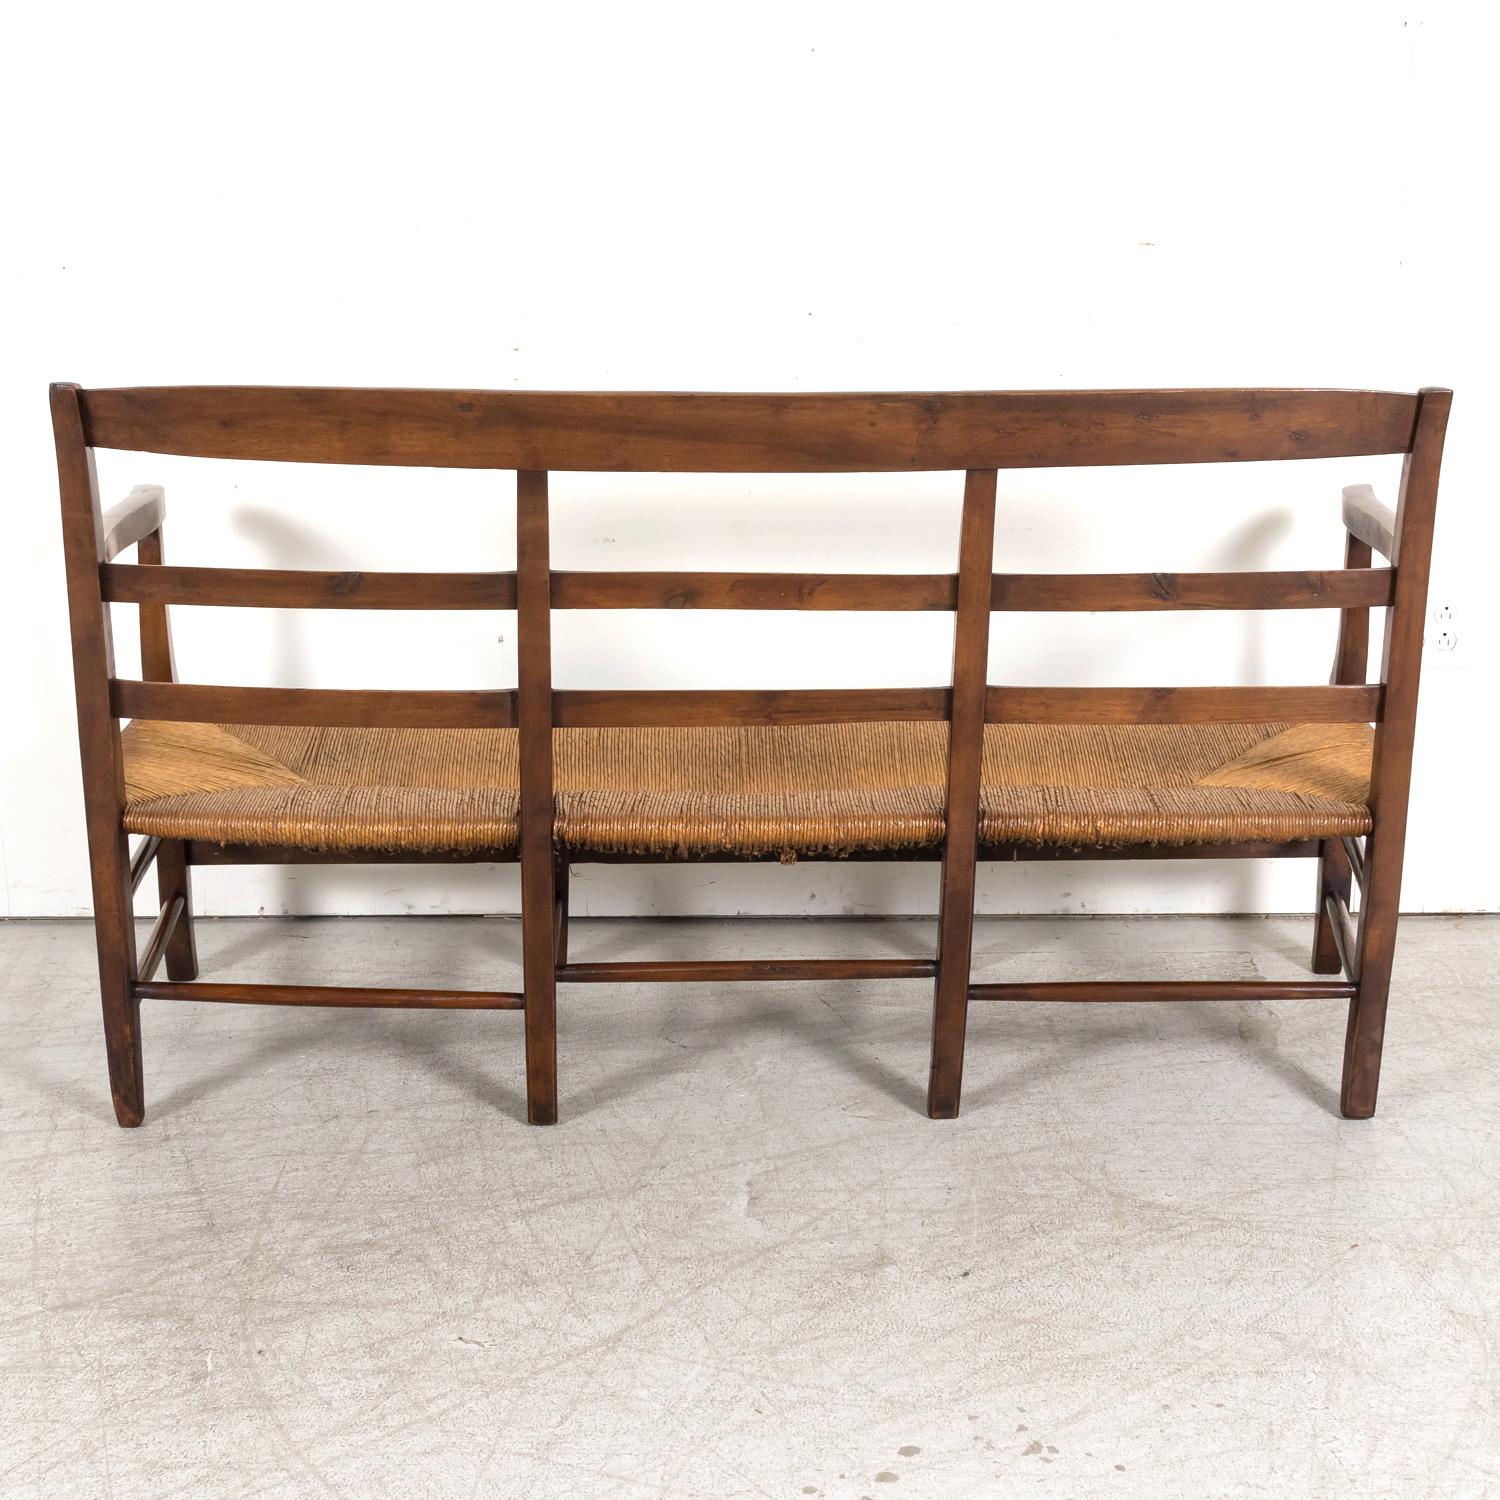 Mid-19th Century French Radassier or Ladder Back Rush Seat Bench 13